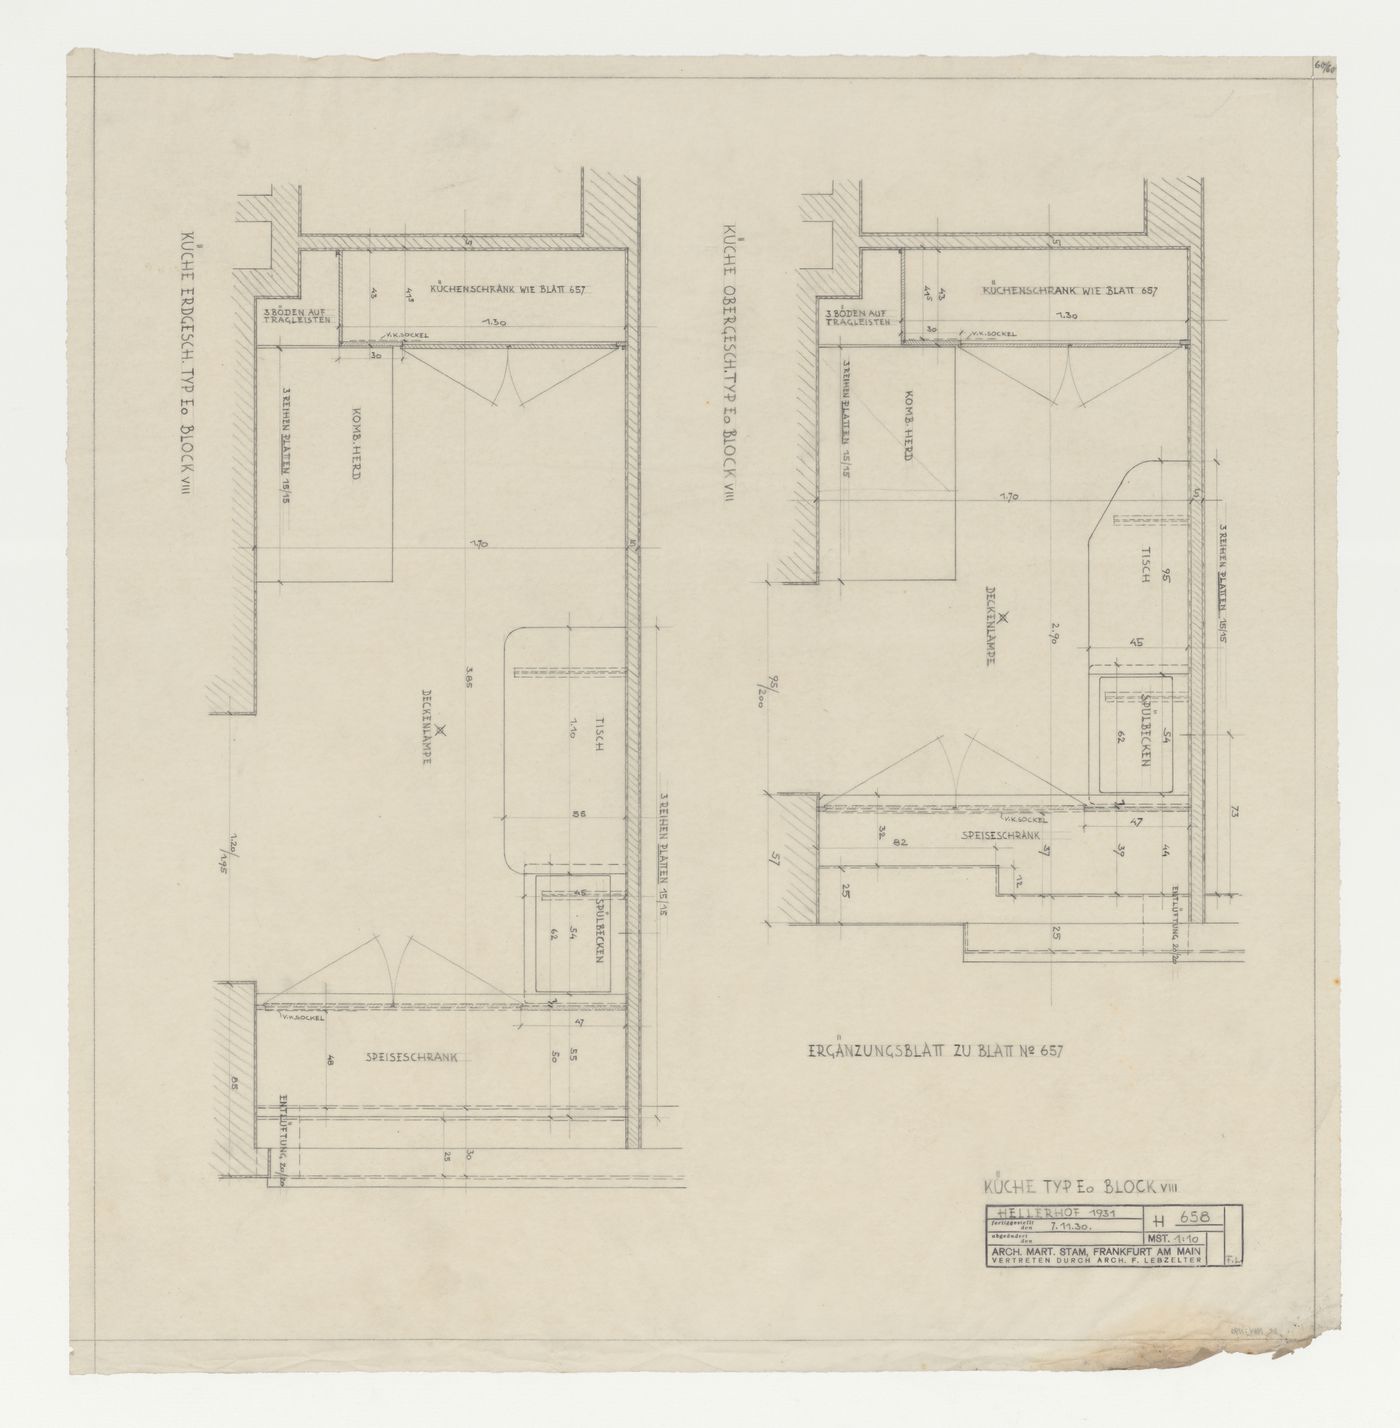 Ground and first floor plans for type EO kitchens for housing units for Block VIII, Hellerhof Housing Estate, Frankfurt am Main, Germany